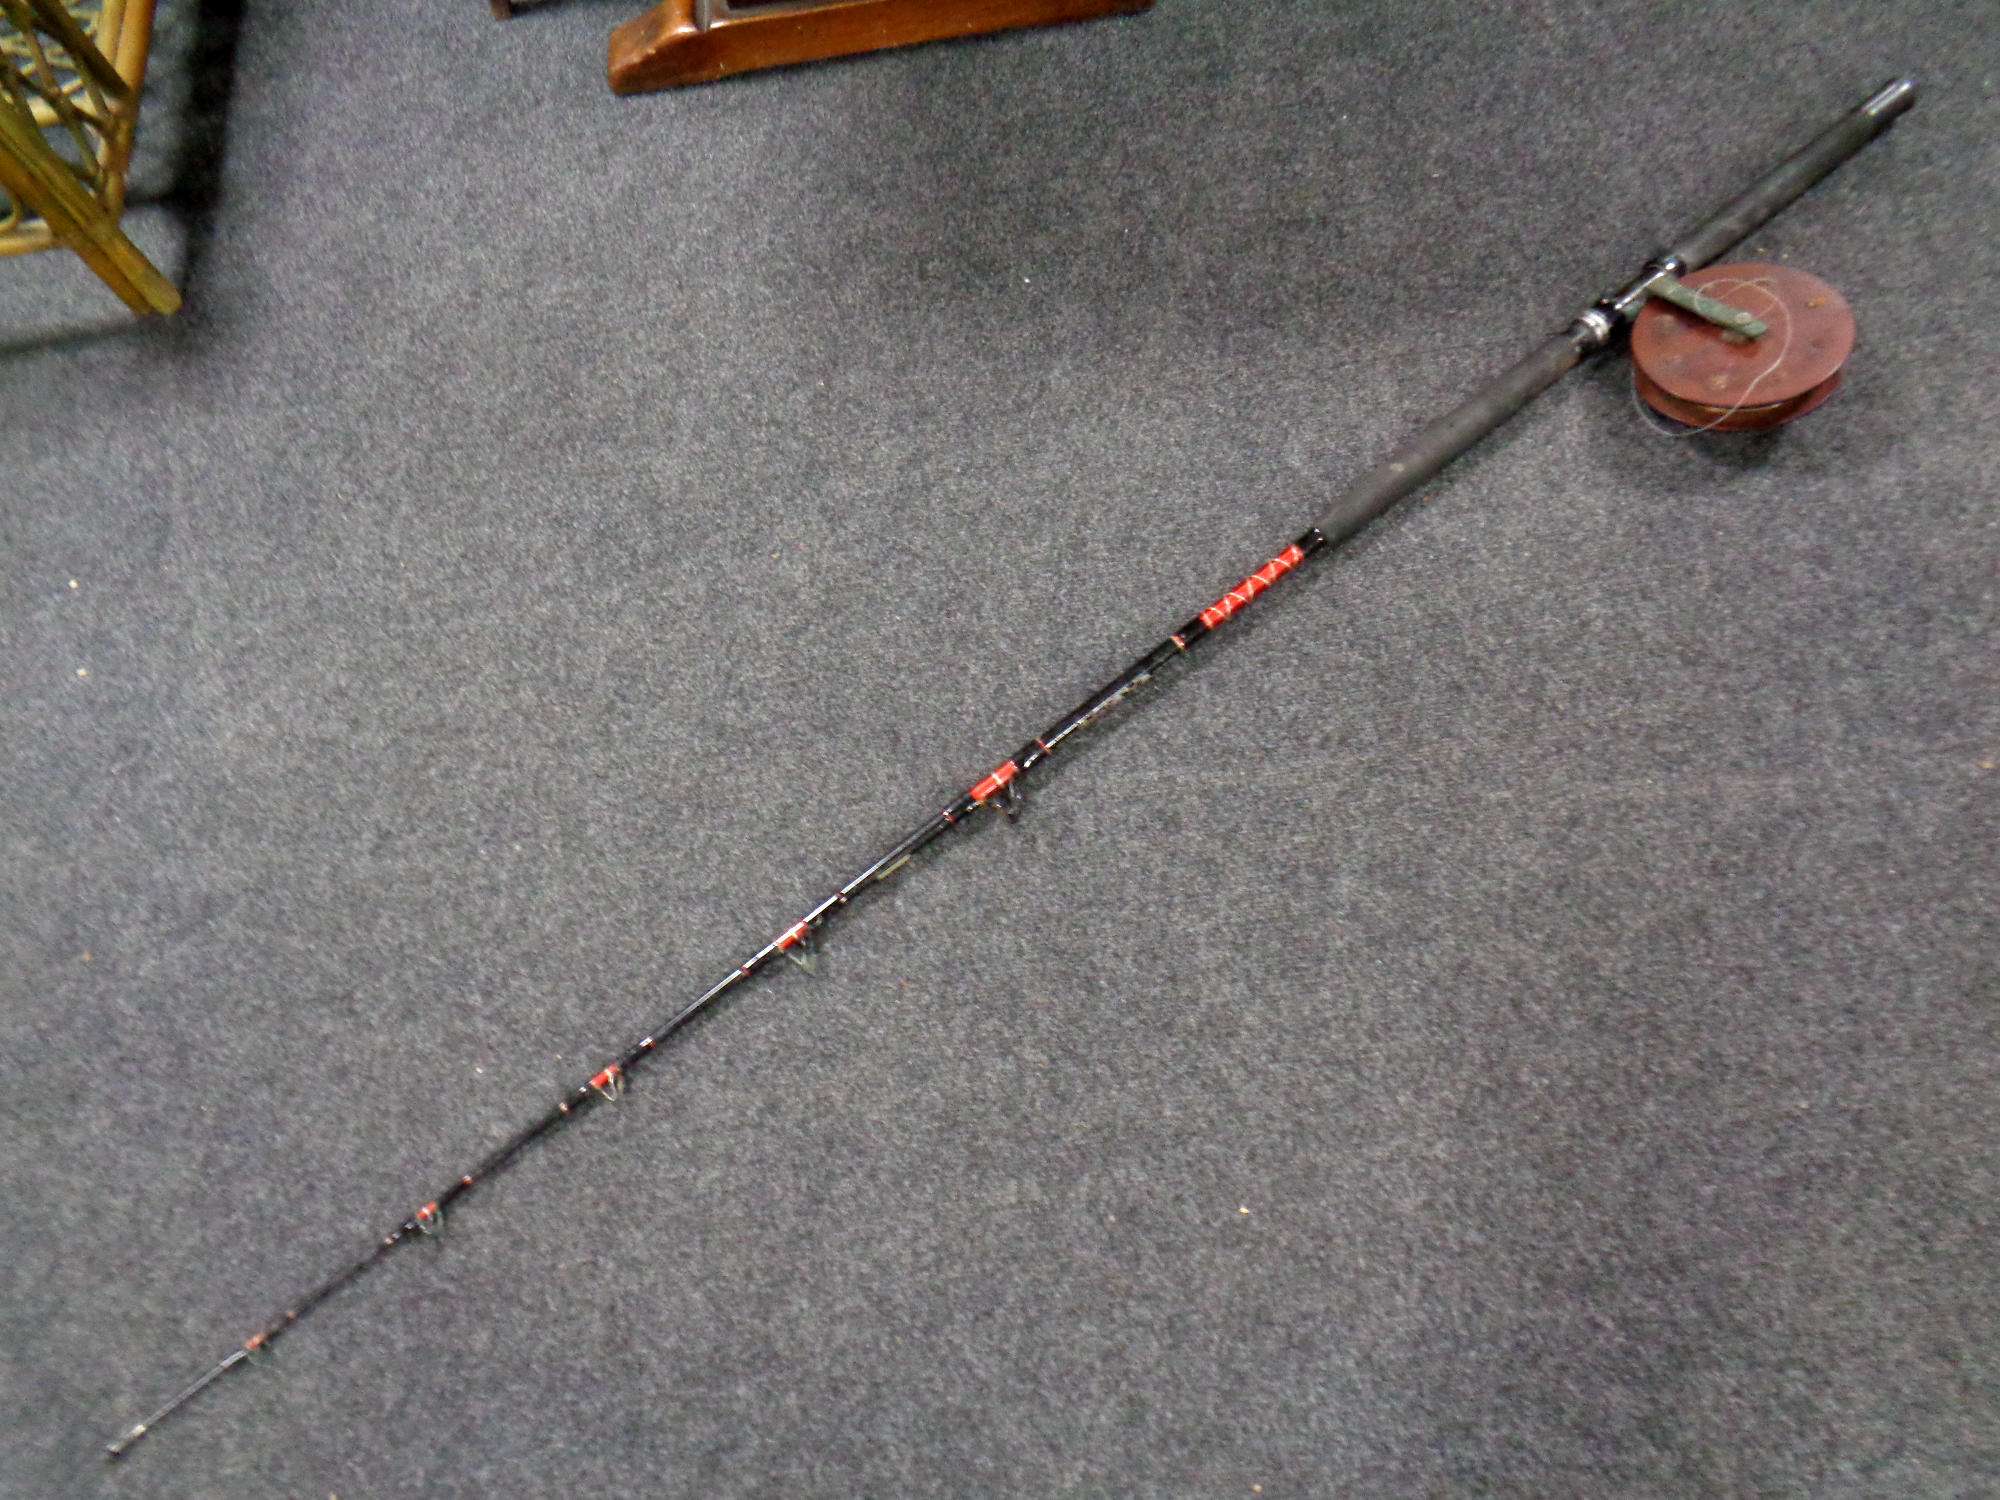 A John Wilson XL 6650 carp rod together with Scarborough fishing reel